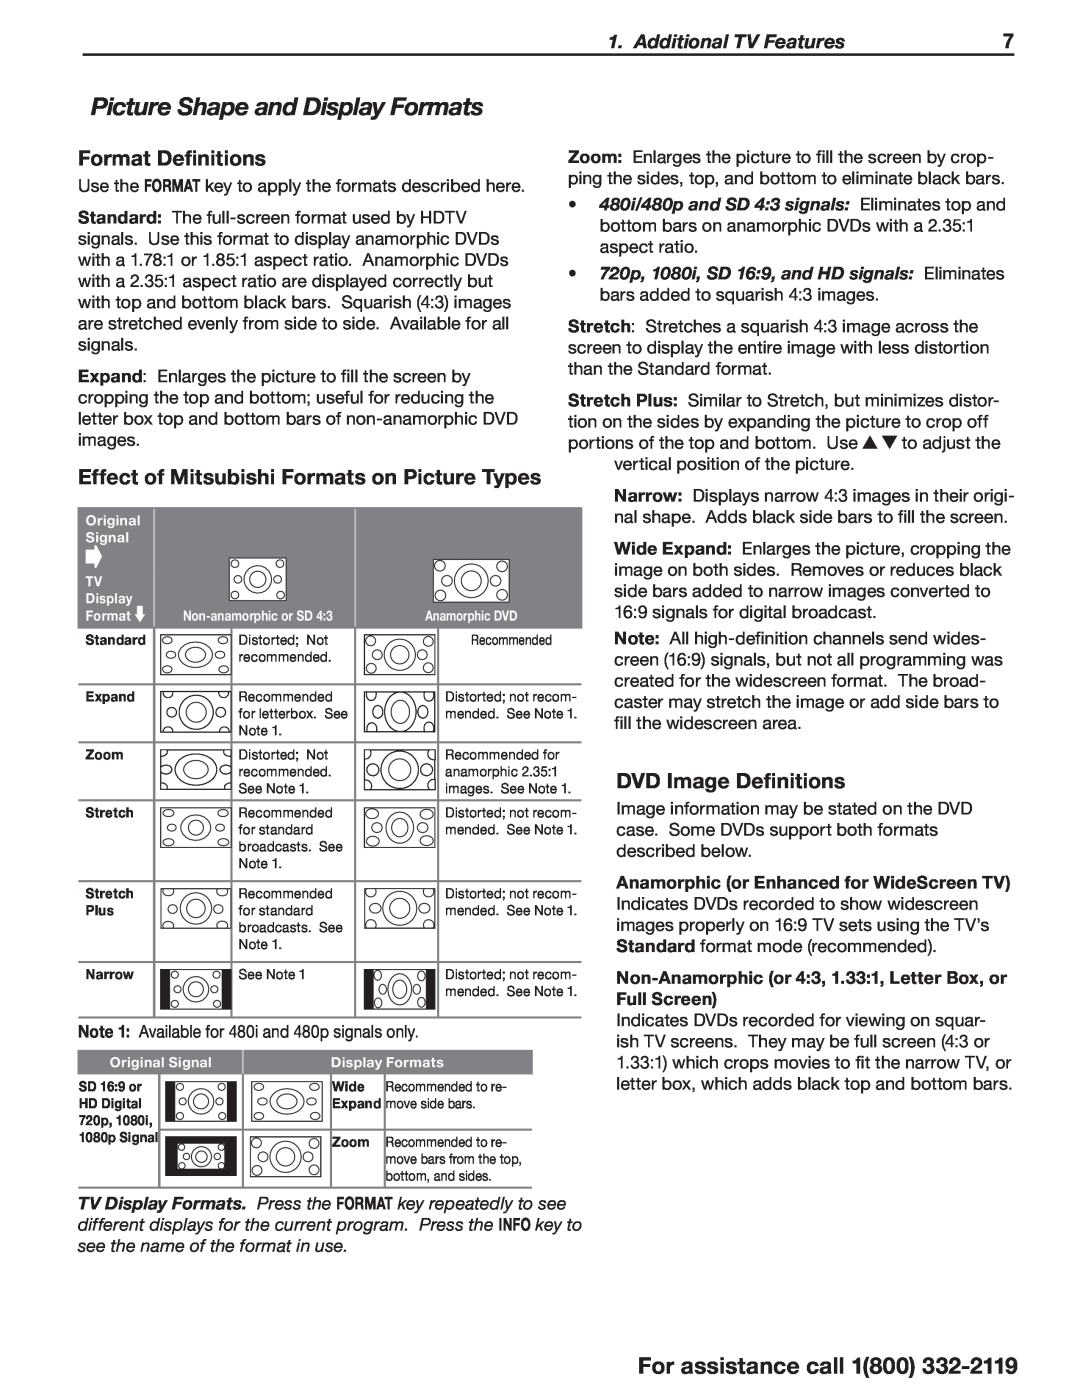 Mitsubishi Electronics WD-73C11, WD-73CA1 manual Picture Shape and Display Formats, For assistance call, Format Definitions 